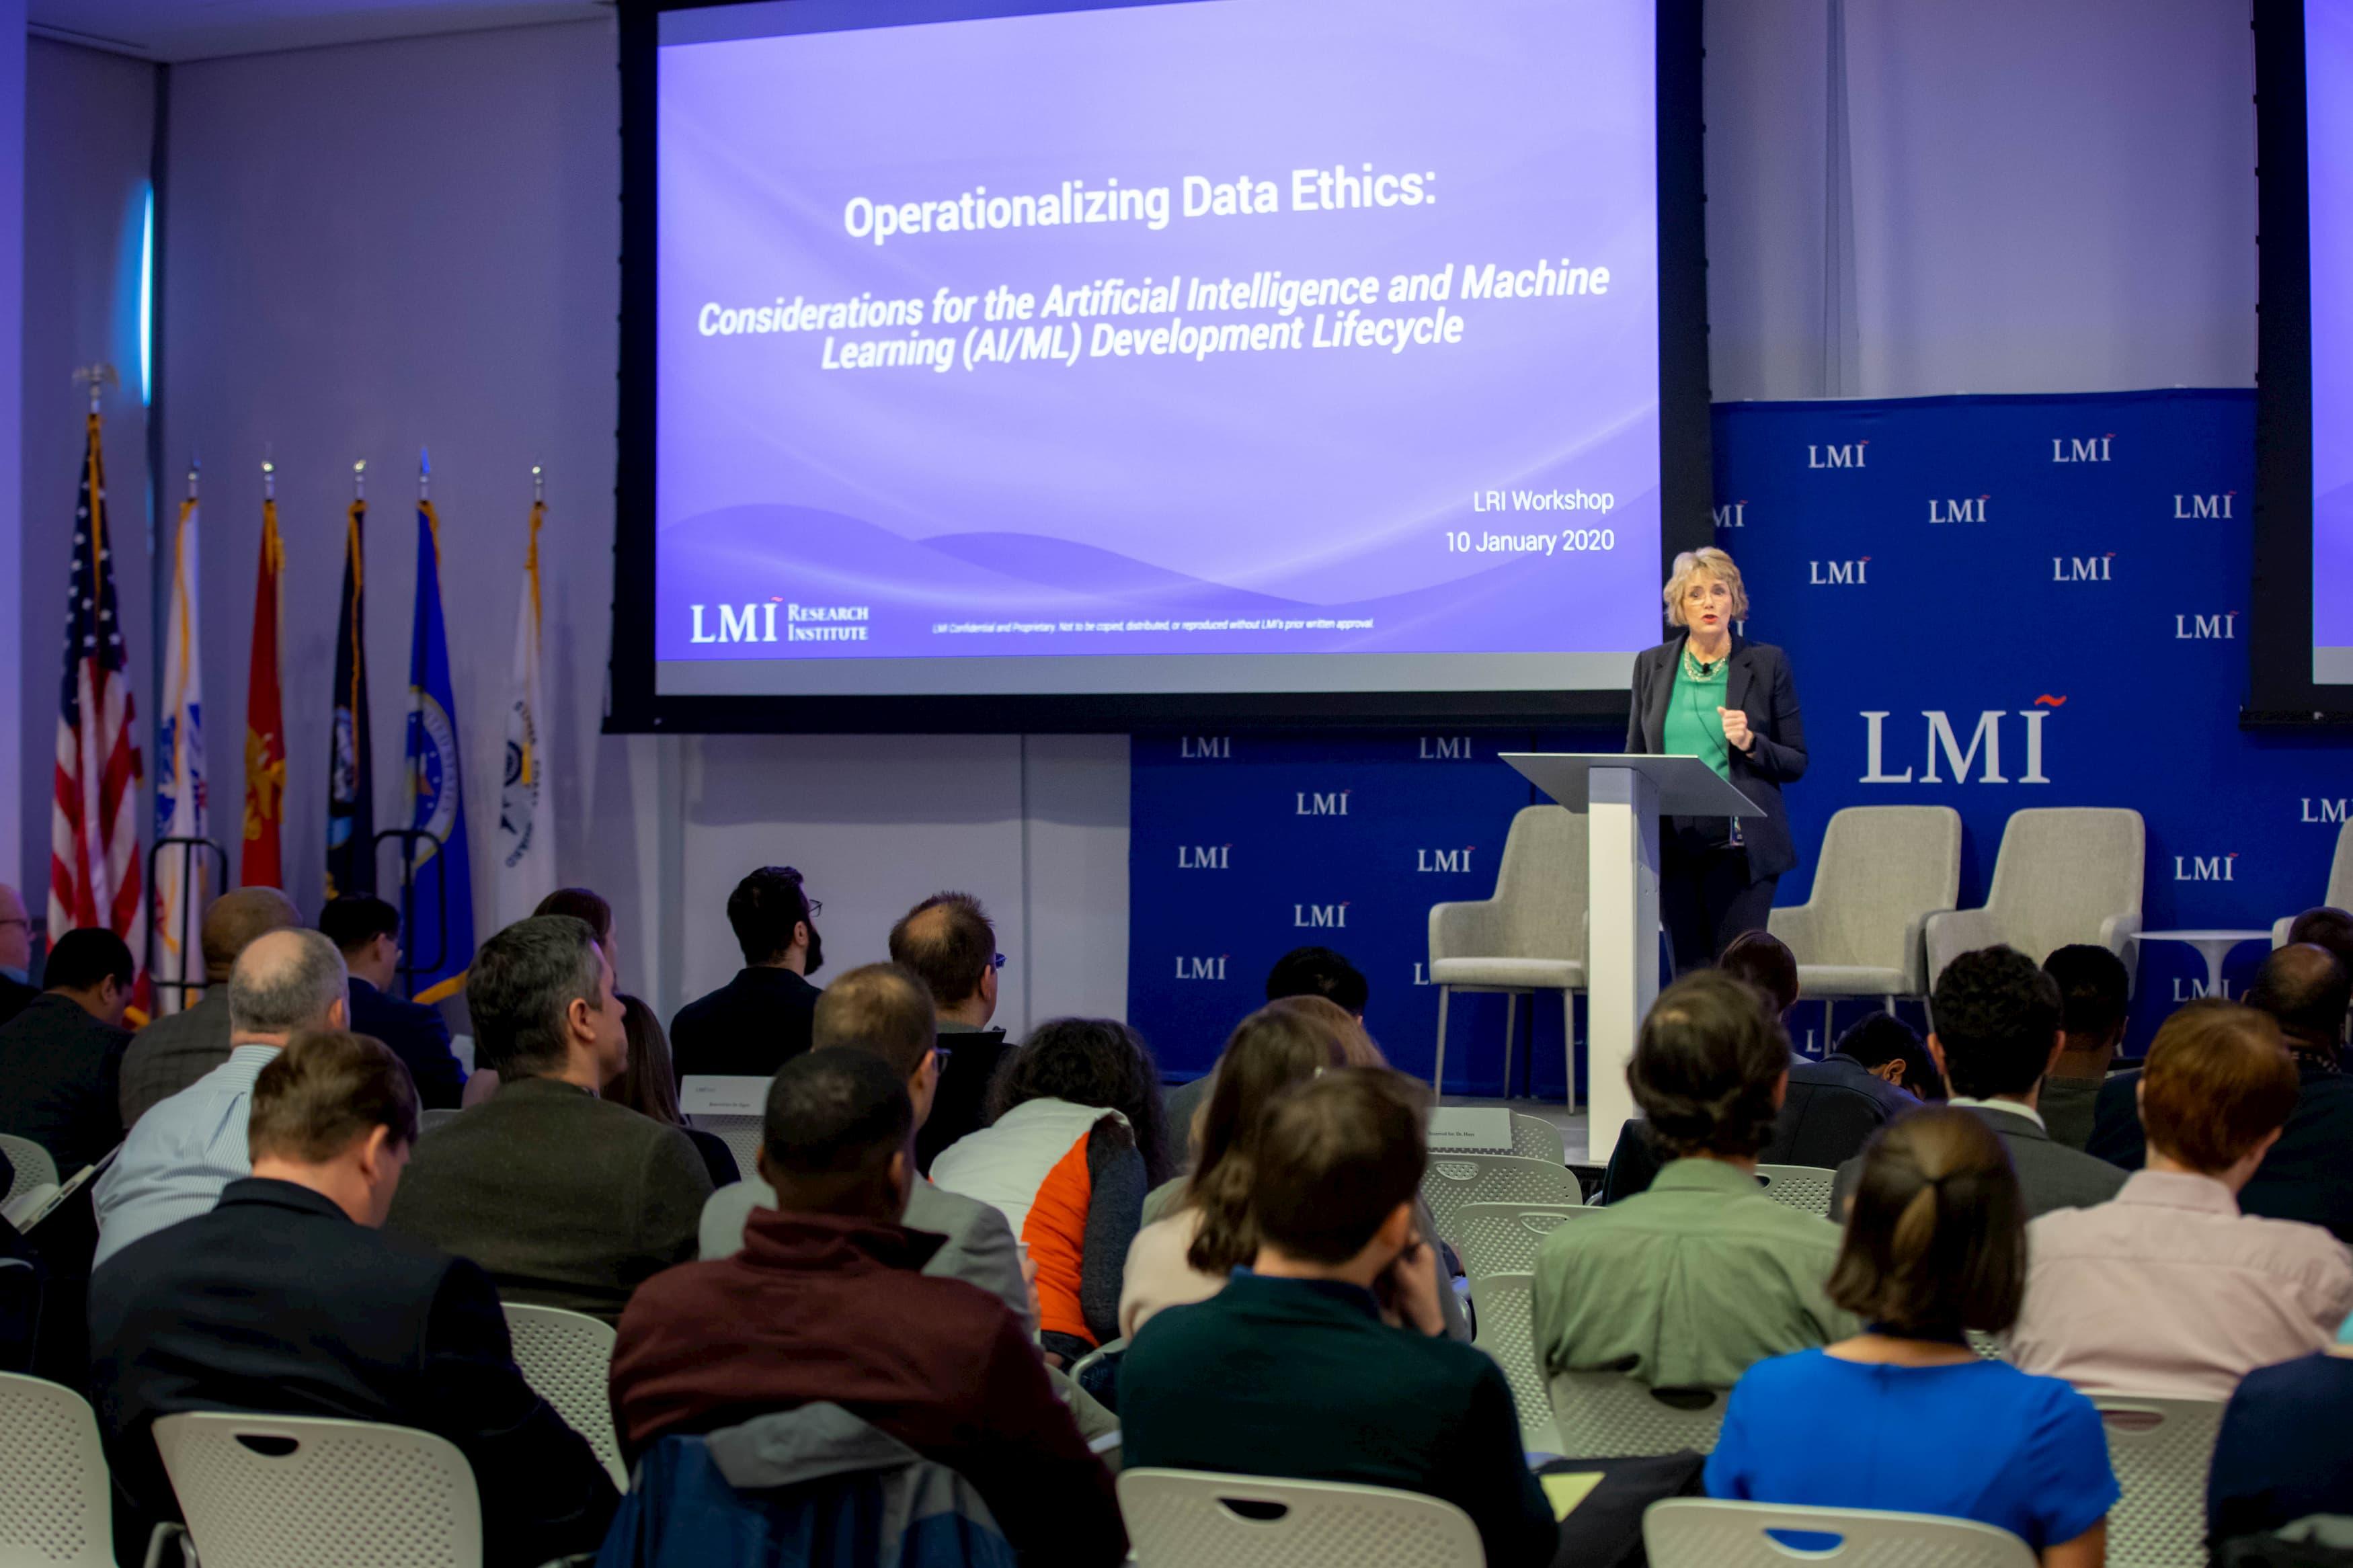 Linda Bixby in front of a presentation screen reading Operationalizing Data Ethics: Considerations for the Artificial Intelligence and Machine Learning (AI/ML) Development Lifecycle, LRI Workshop, 10 January 2020, LMI Research Institute